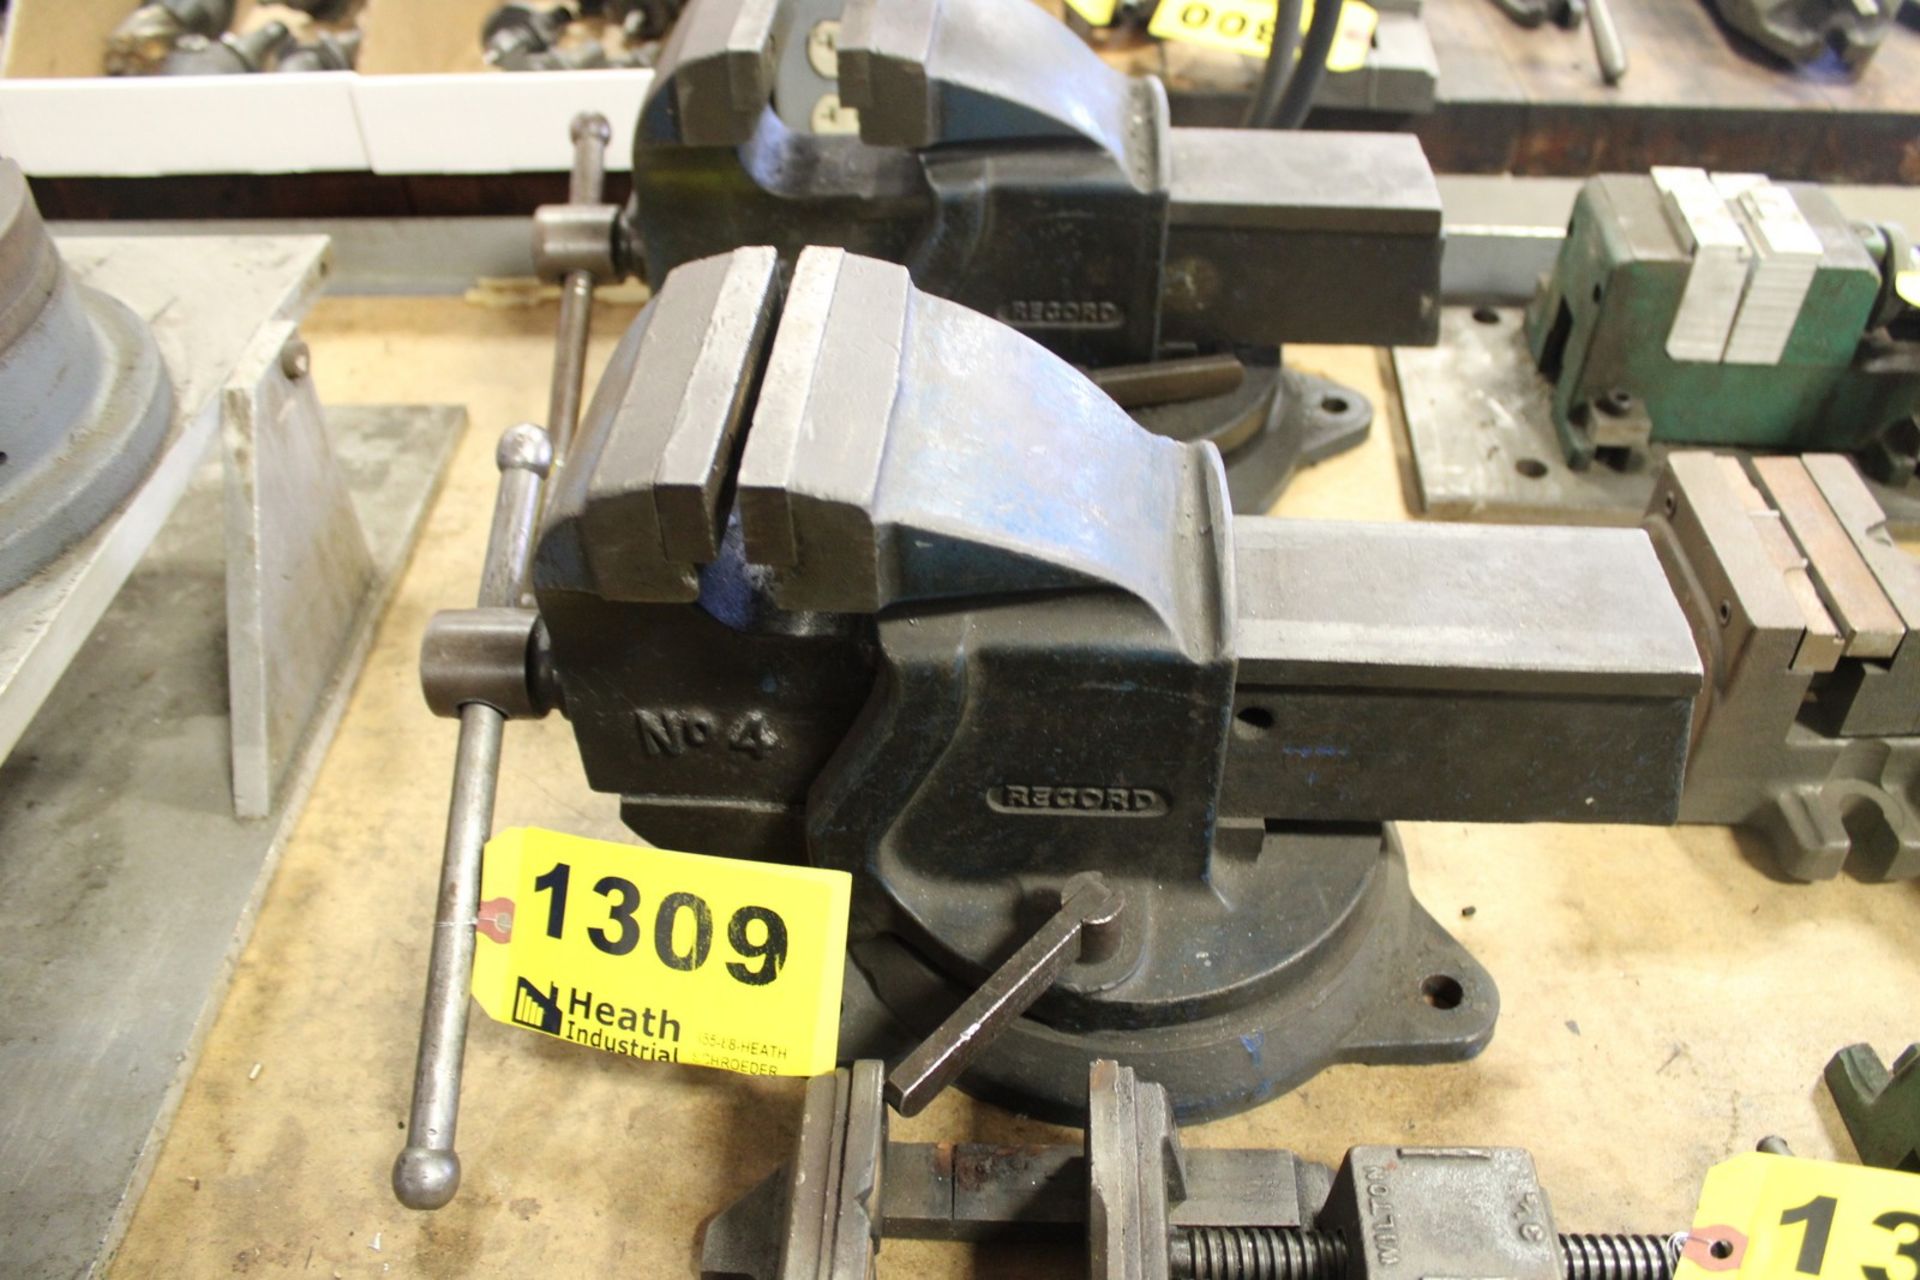 RECORD NO. 4. BENCH TOP VISE WITH ROTARY BASE